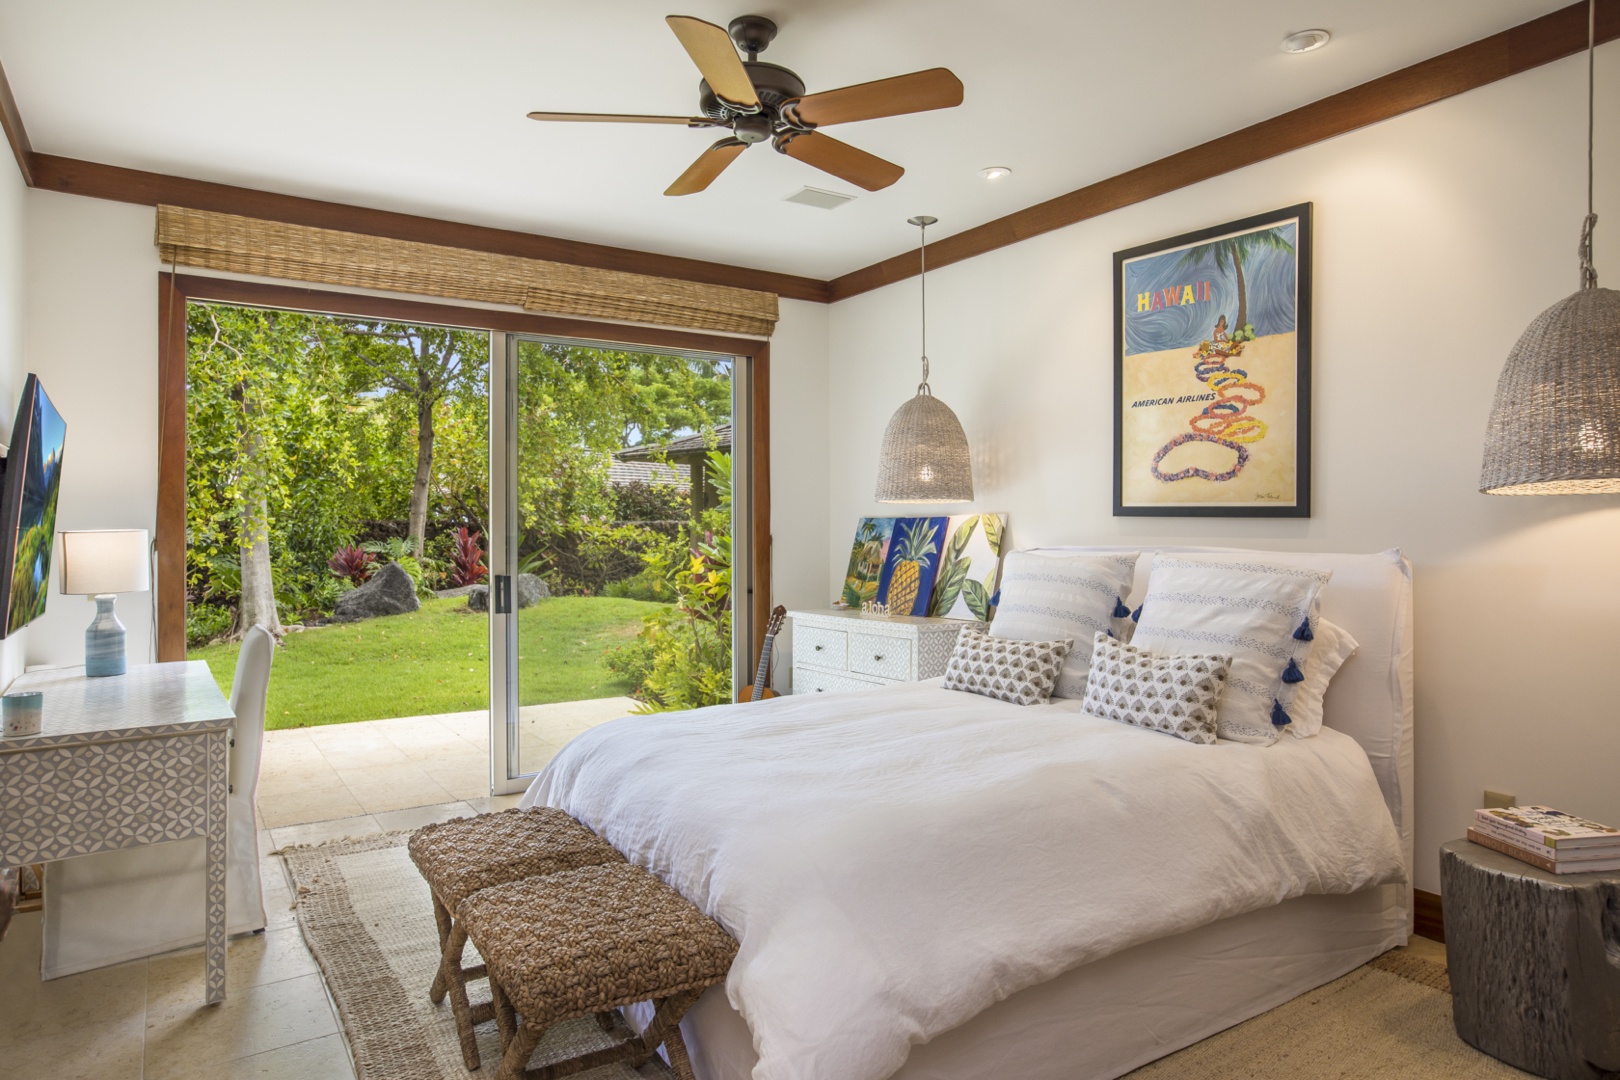 Kailua Kona Vacation Rentals, 4BD Kahikole Street (218) Estate Home at Four Seasons Resort at Hualalai - Second bedroom with a queen bed, wall-mounted television, private lanai & en suite bath